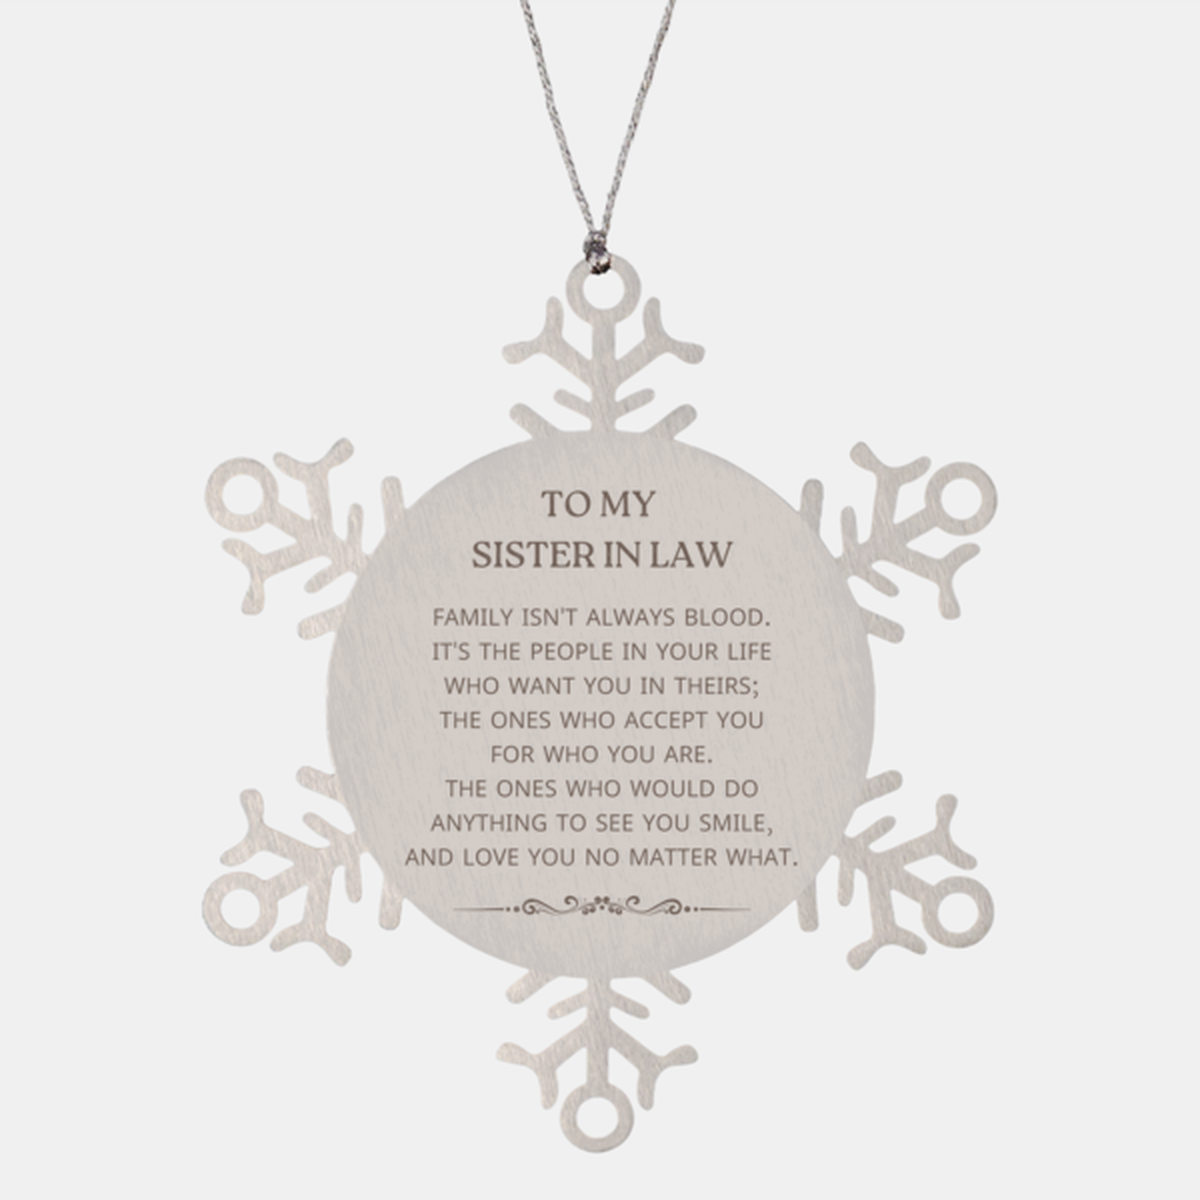 To My Sister In Law Gifts, Family isn't always blood, Sister In Law Snowflake Ornament, Birthday Christmas Unique Present For Sister In Law